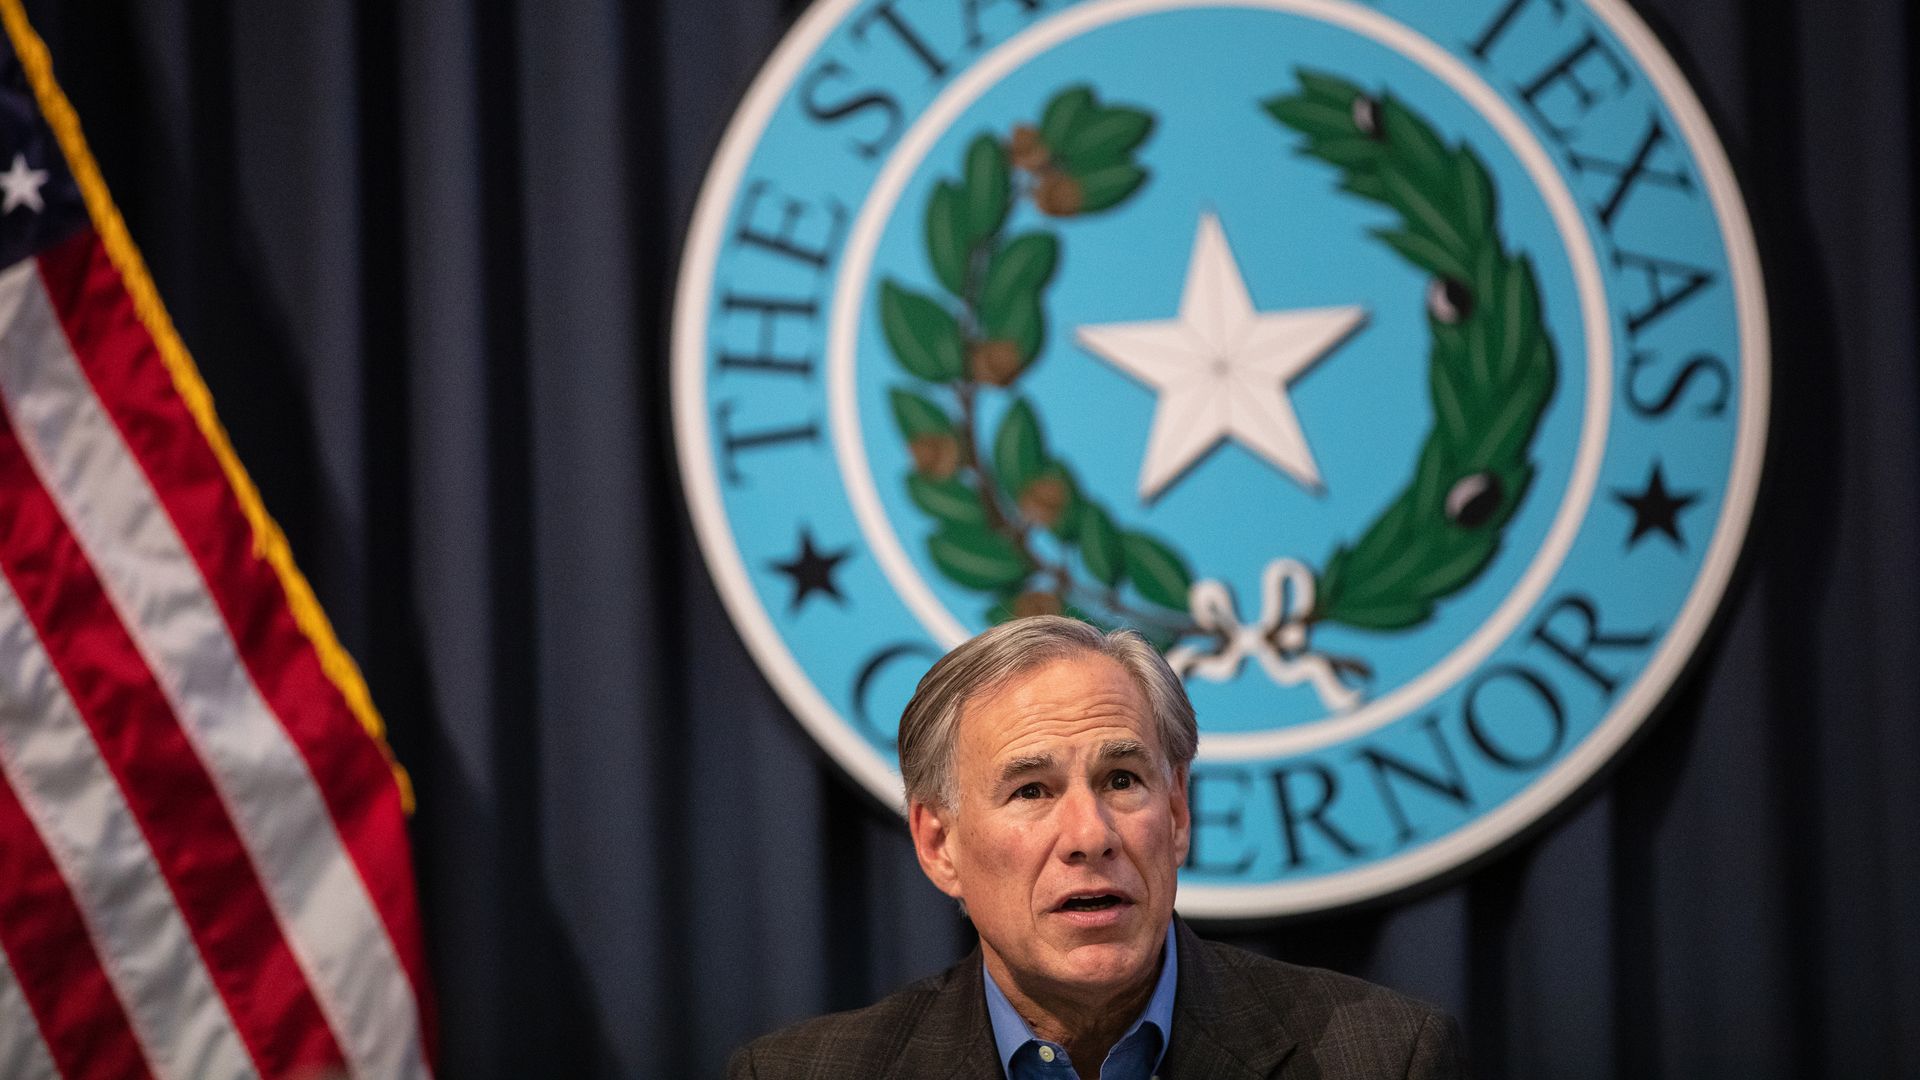 Photo of Greg Abbott's head against a background with the Texas state seal